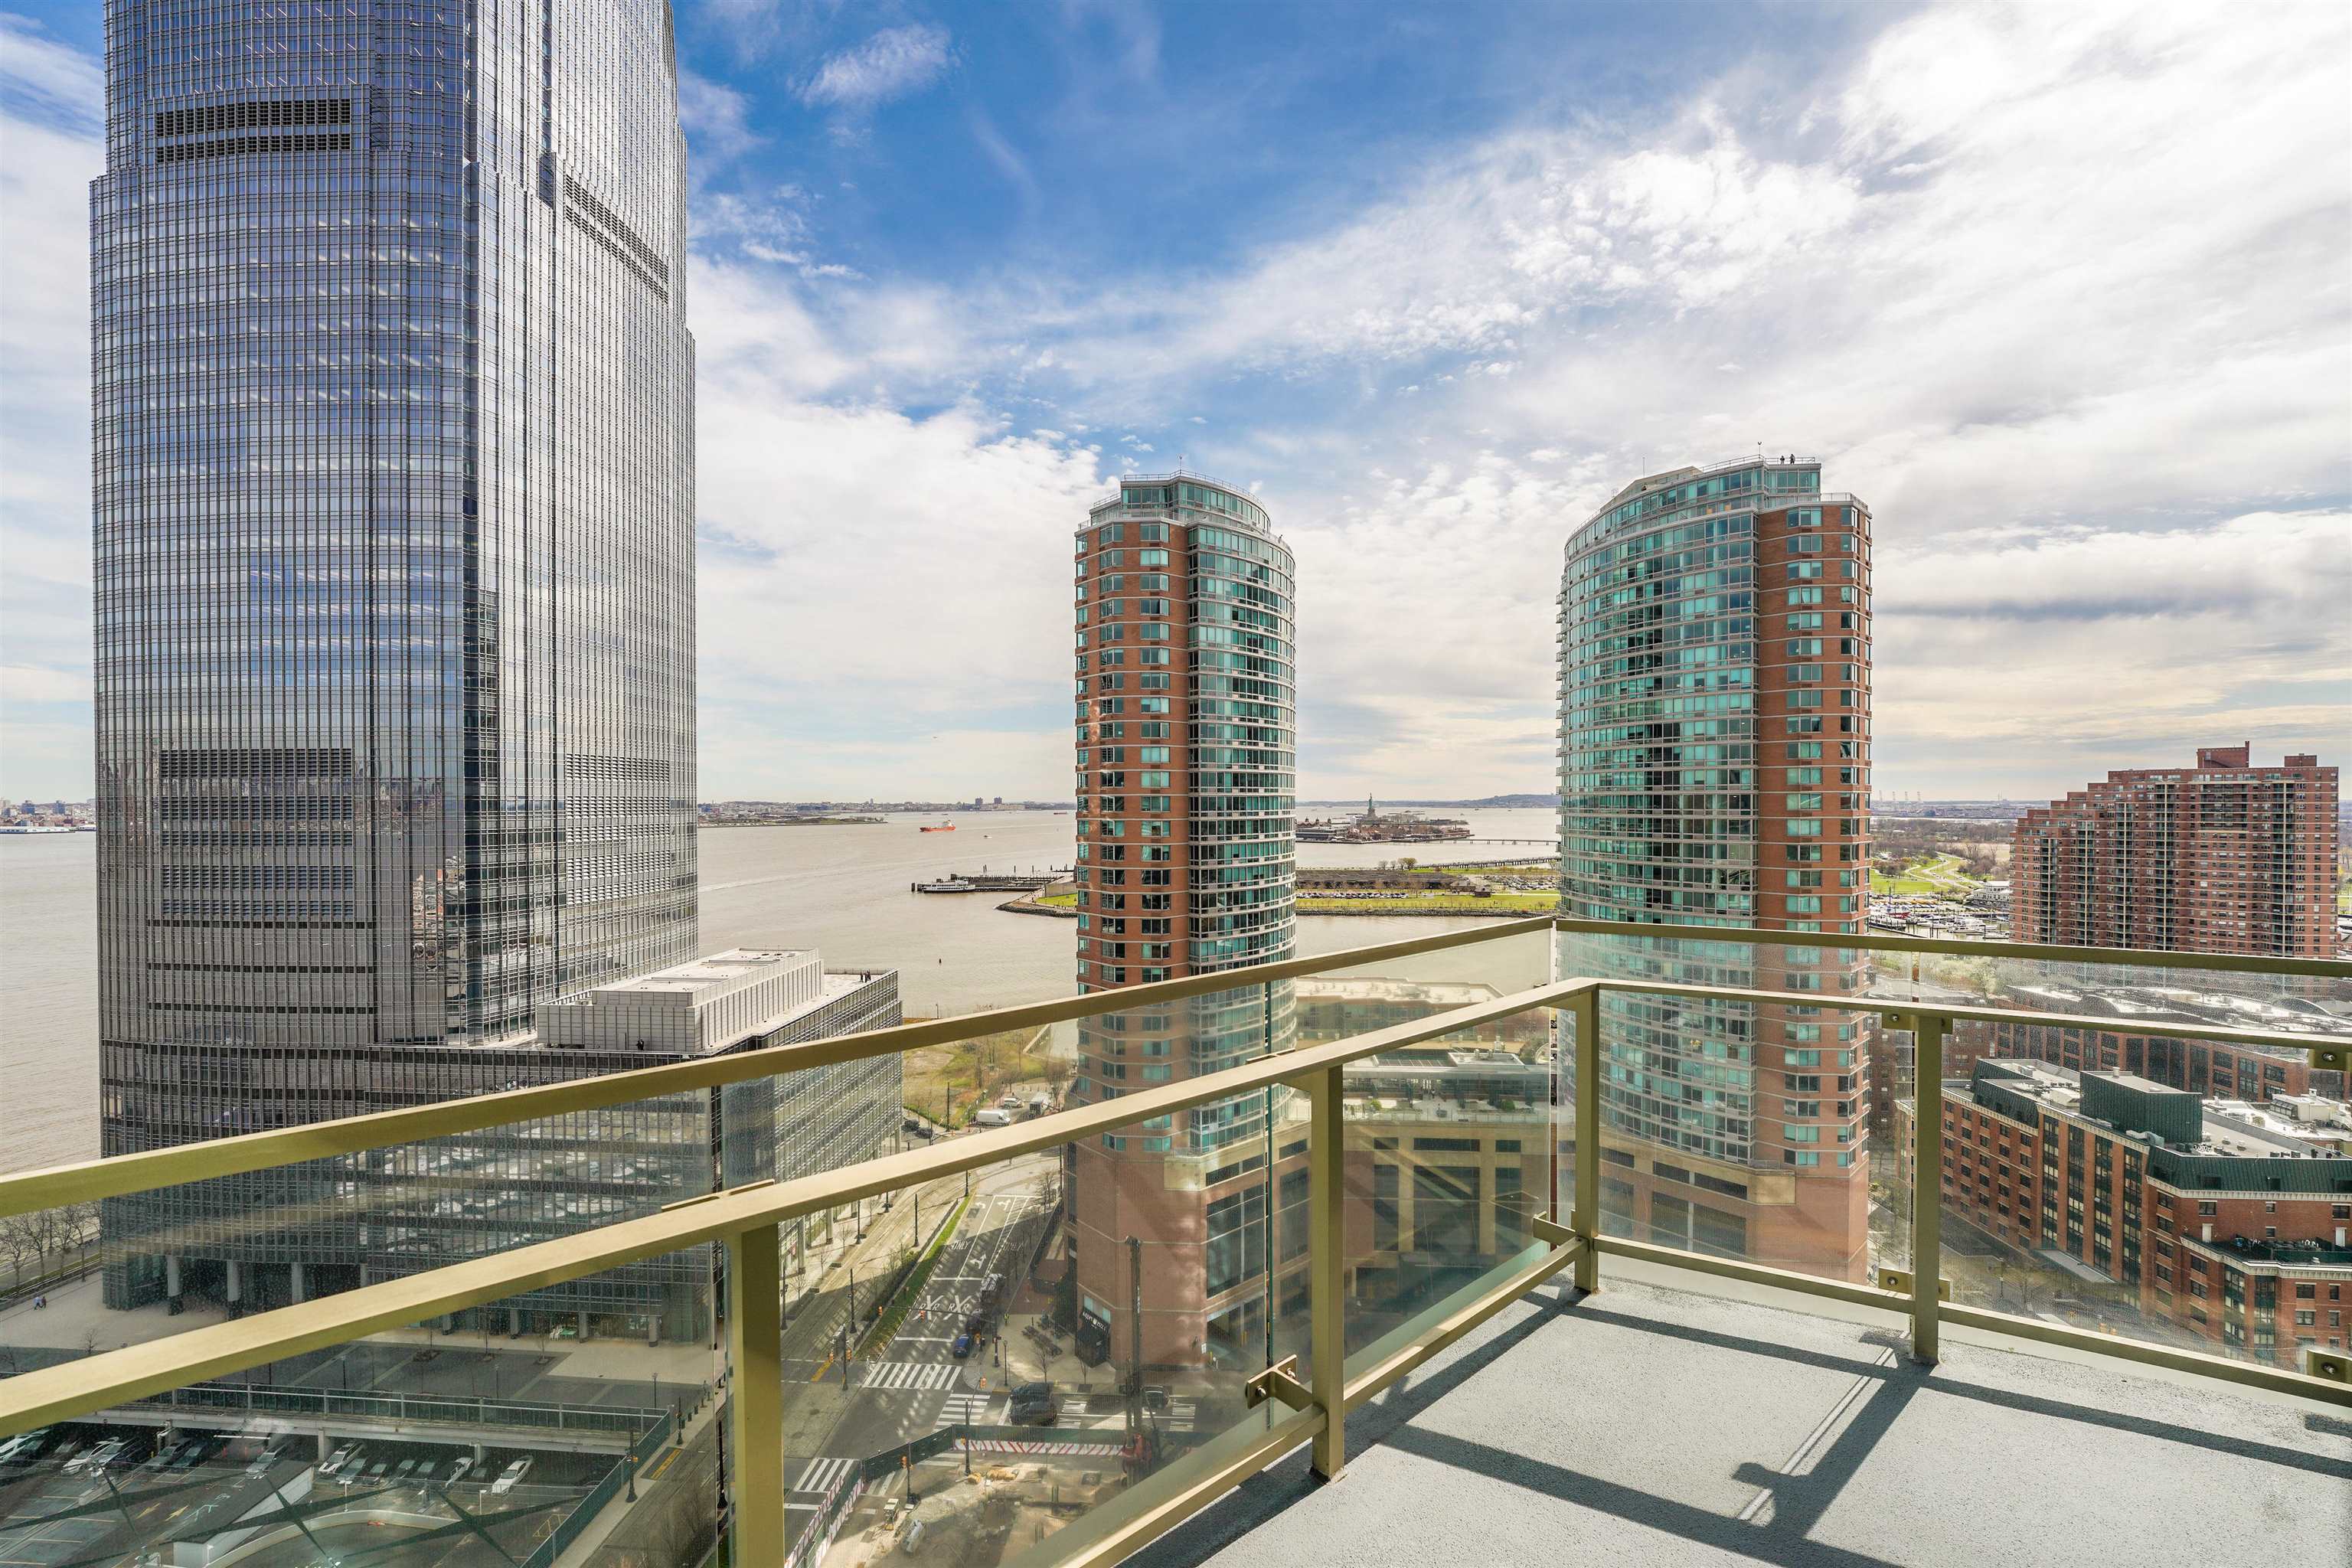 # 240006513 - For Rent in JERSEY CITY - Downtown NJ